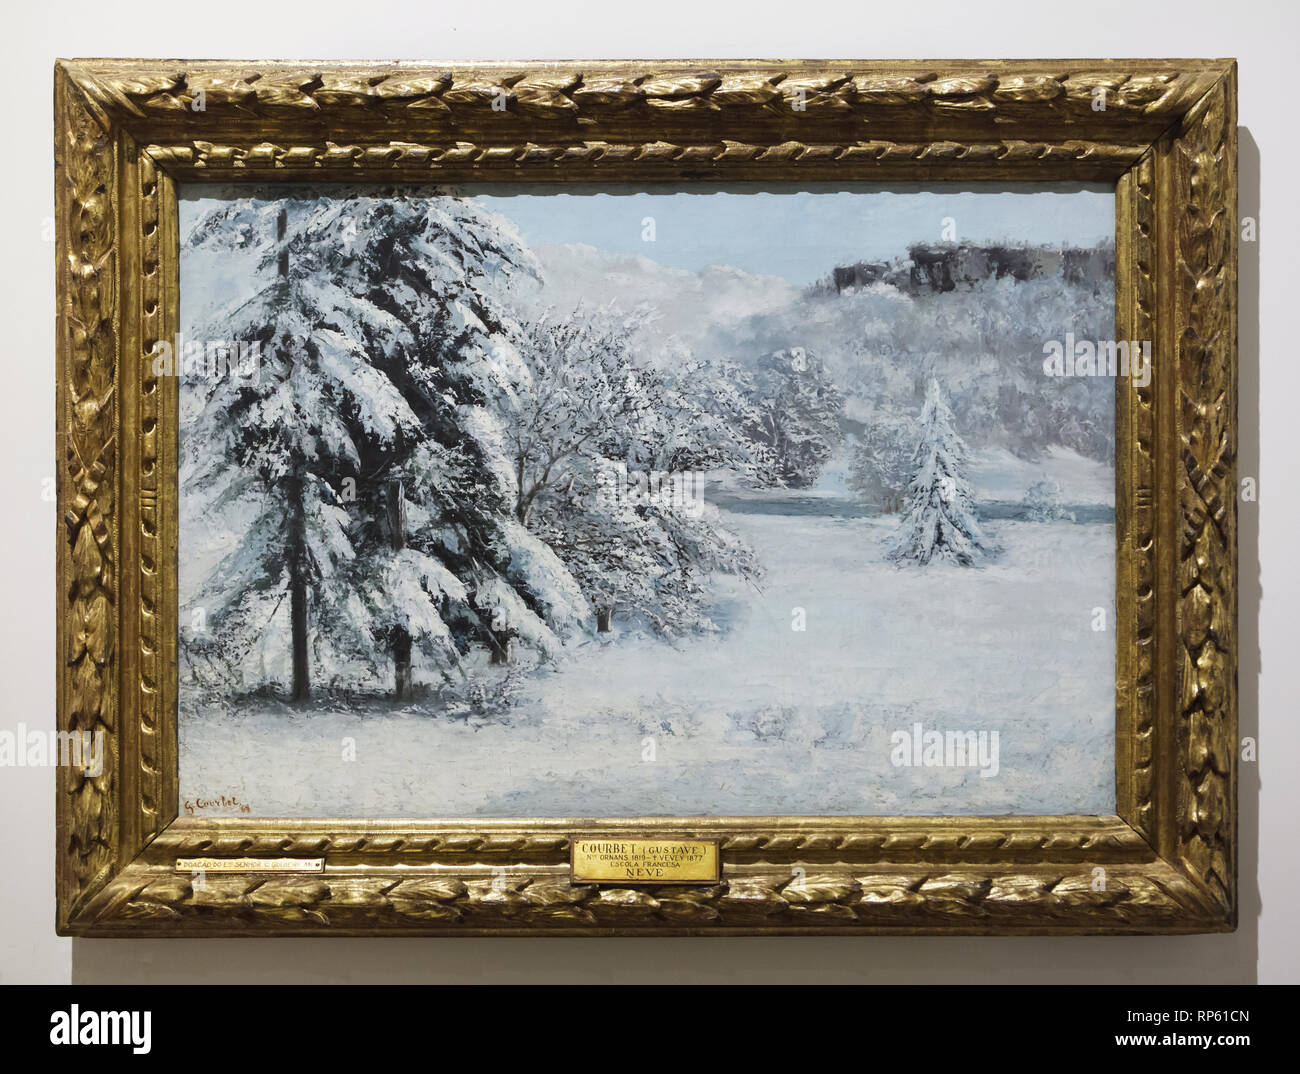 Painting 'Winter Landscape' by French realist painter Gustave Courbet (1868) on display in the National Museum of Ancient Art (Museu Nacional de Arte Antiga) in Lisbon, Portugal. The painting was donated to the museum by British businessman and philanthropist Calouste Gulbenkian in 1952. Stock Photo